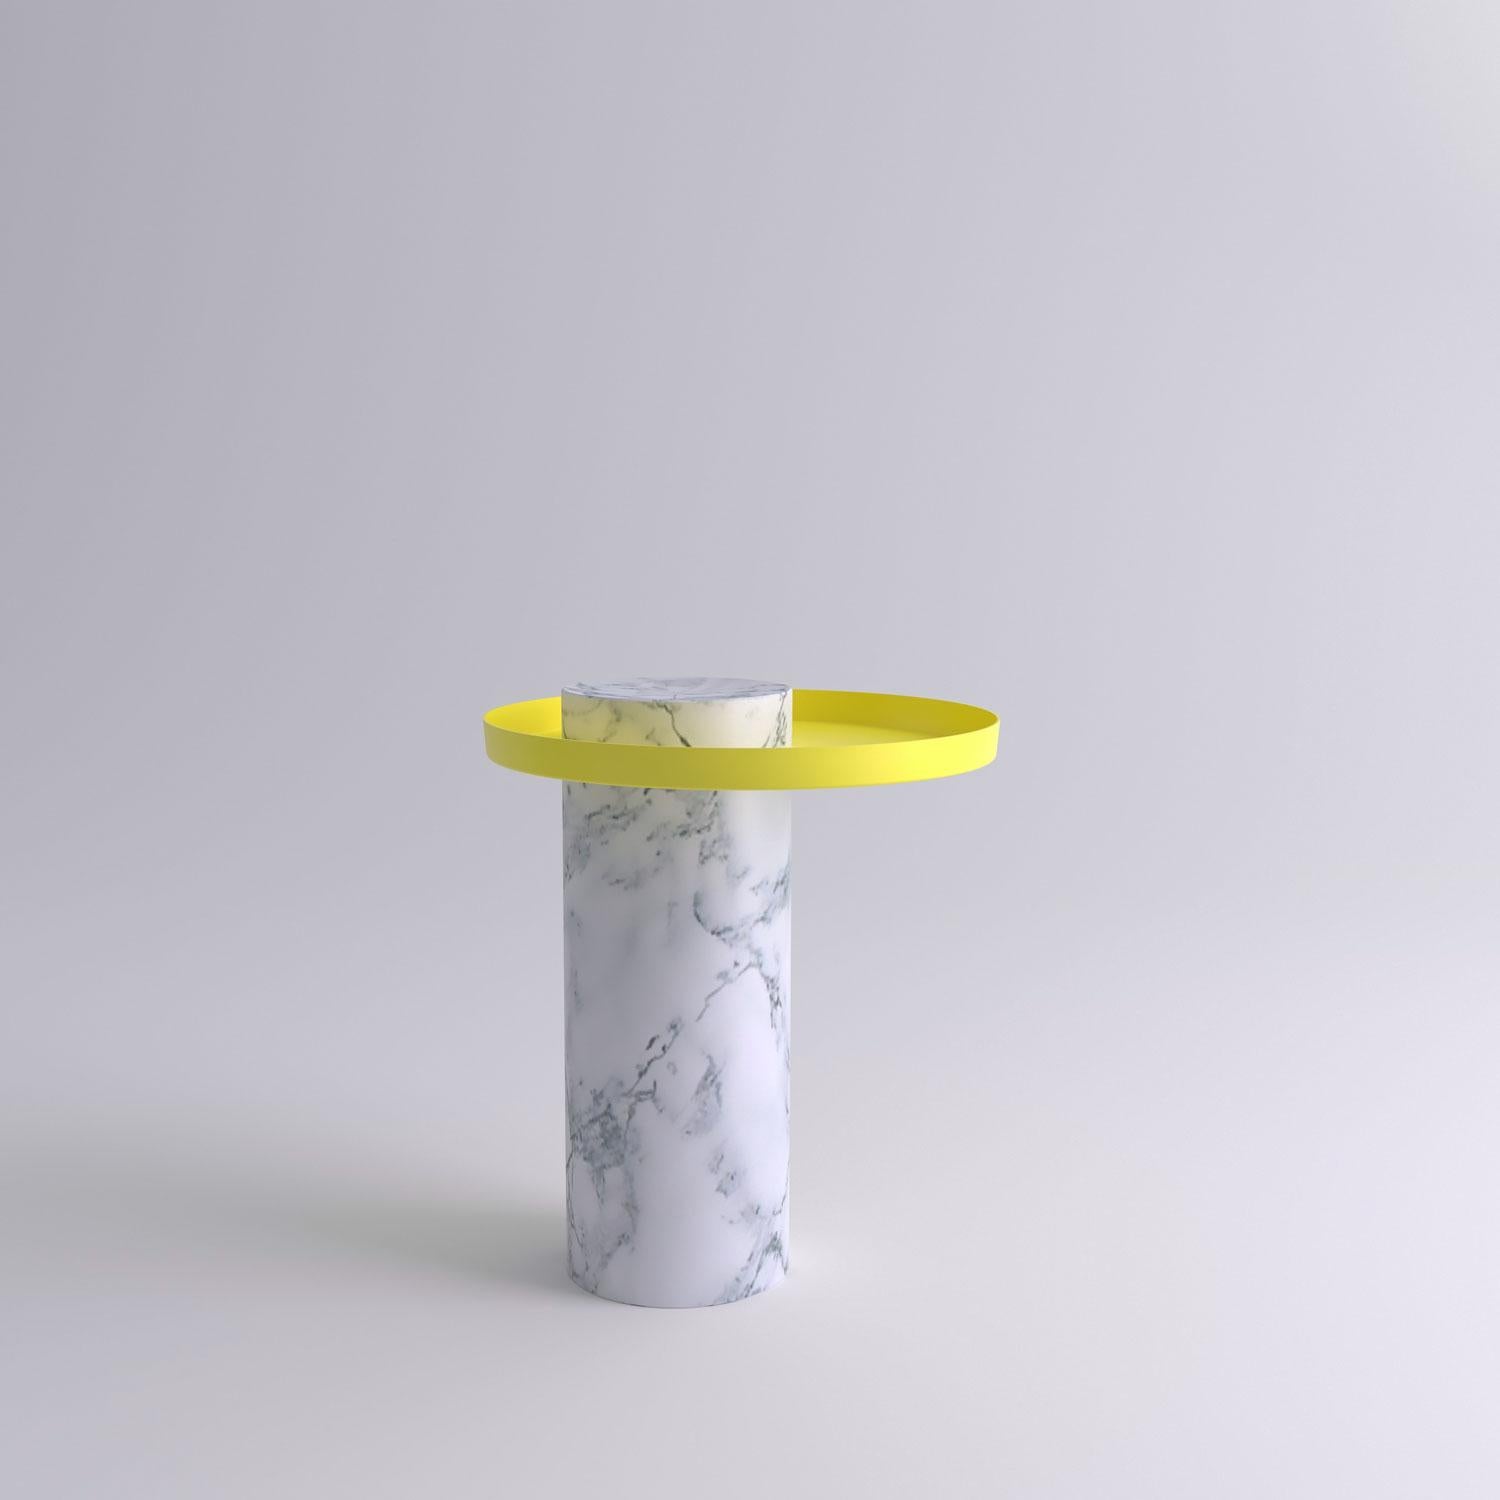 Medium white contemporary guéridon, Sebastian Herkner
Dimensions: D 40 x H 46 cm
Materials: Pele de Tigre marble, yellow metal tray

The salute table exists in 3 sizes, 4 different marble stones for the column and 5 different finishes for the